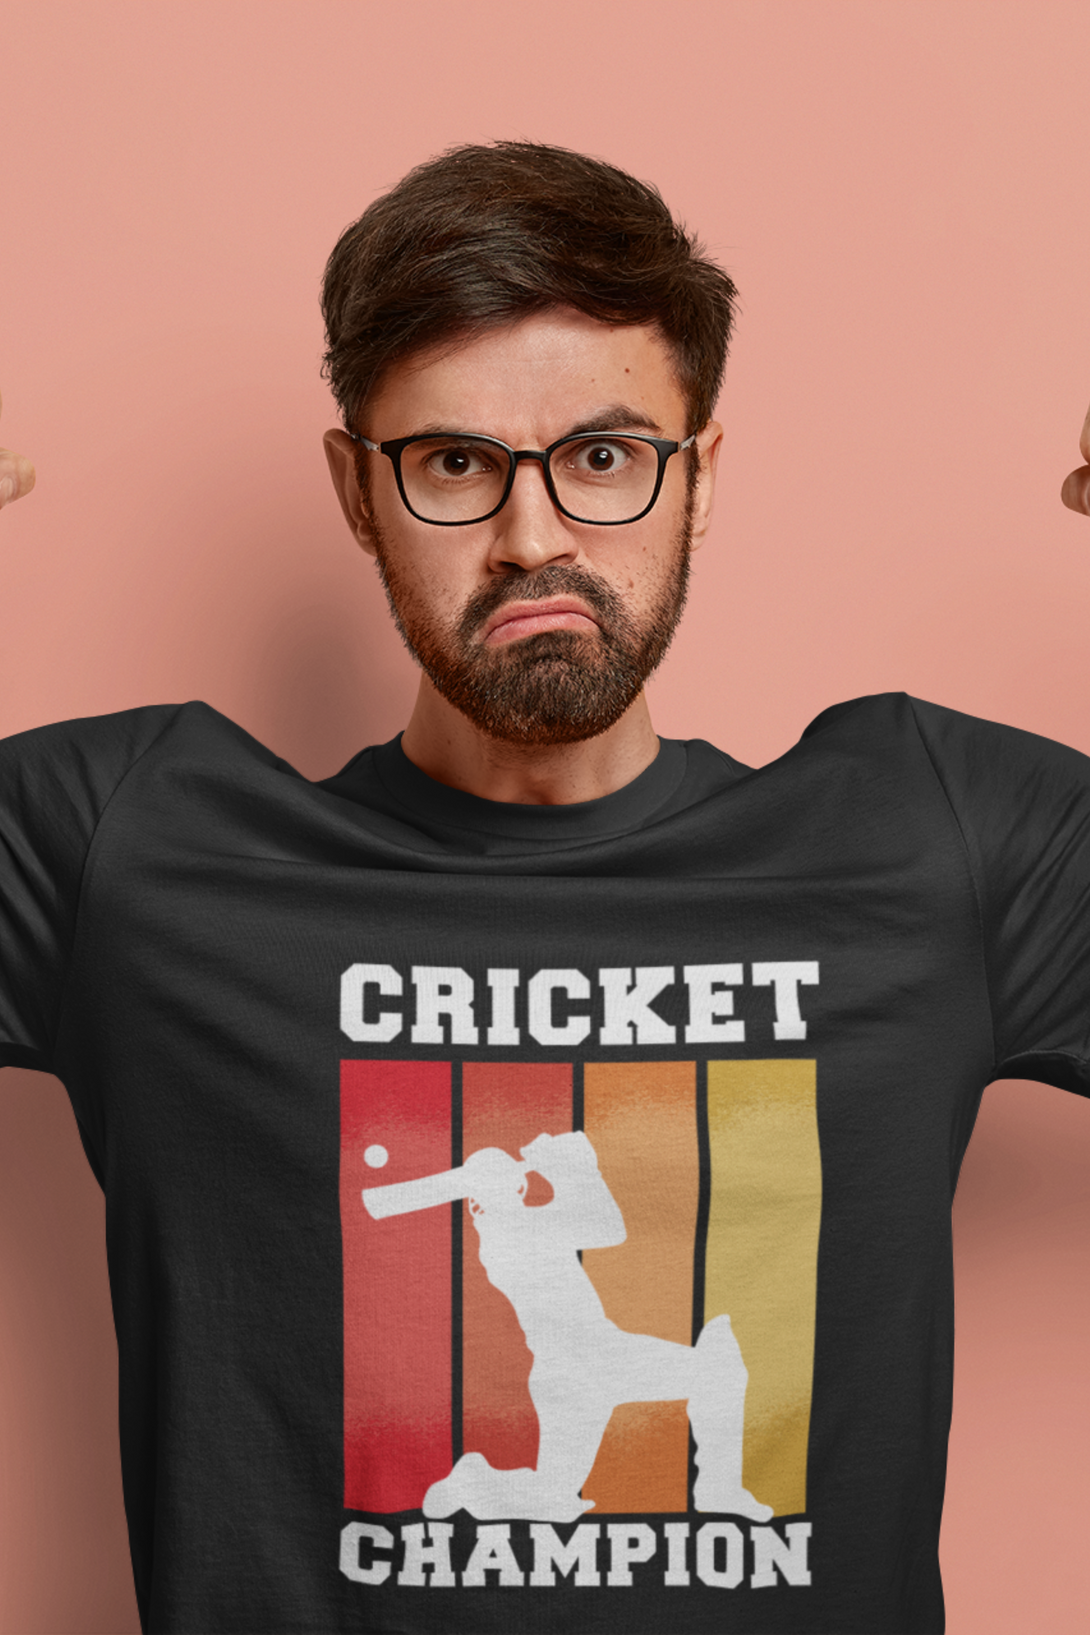 Cricket Champion Printed T-Shirt For Men - WowWaves - 2